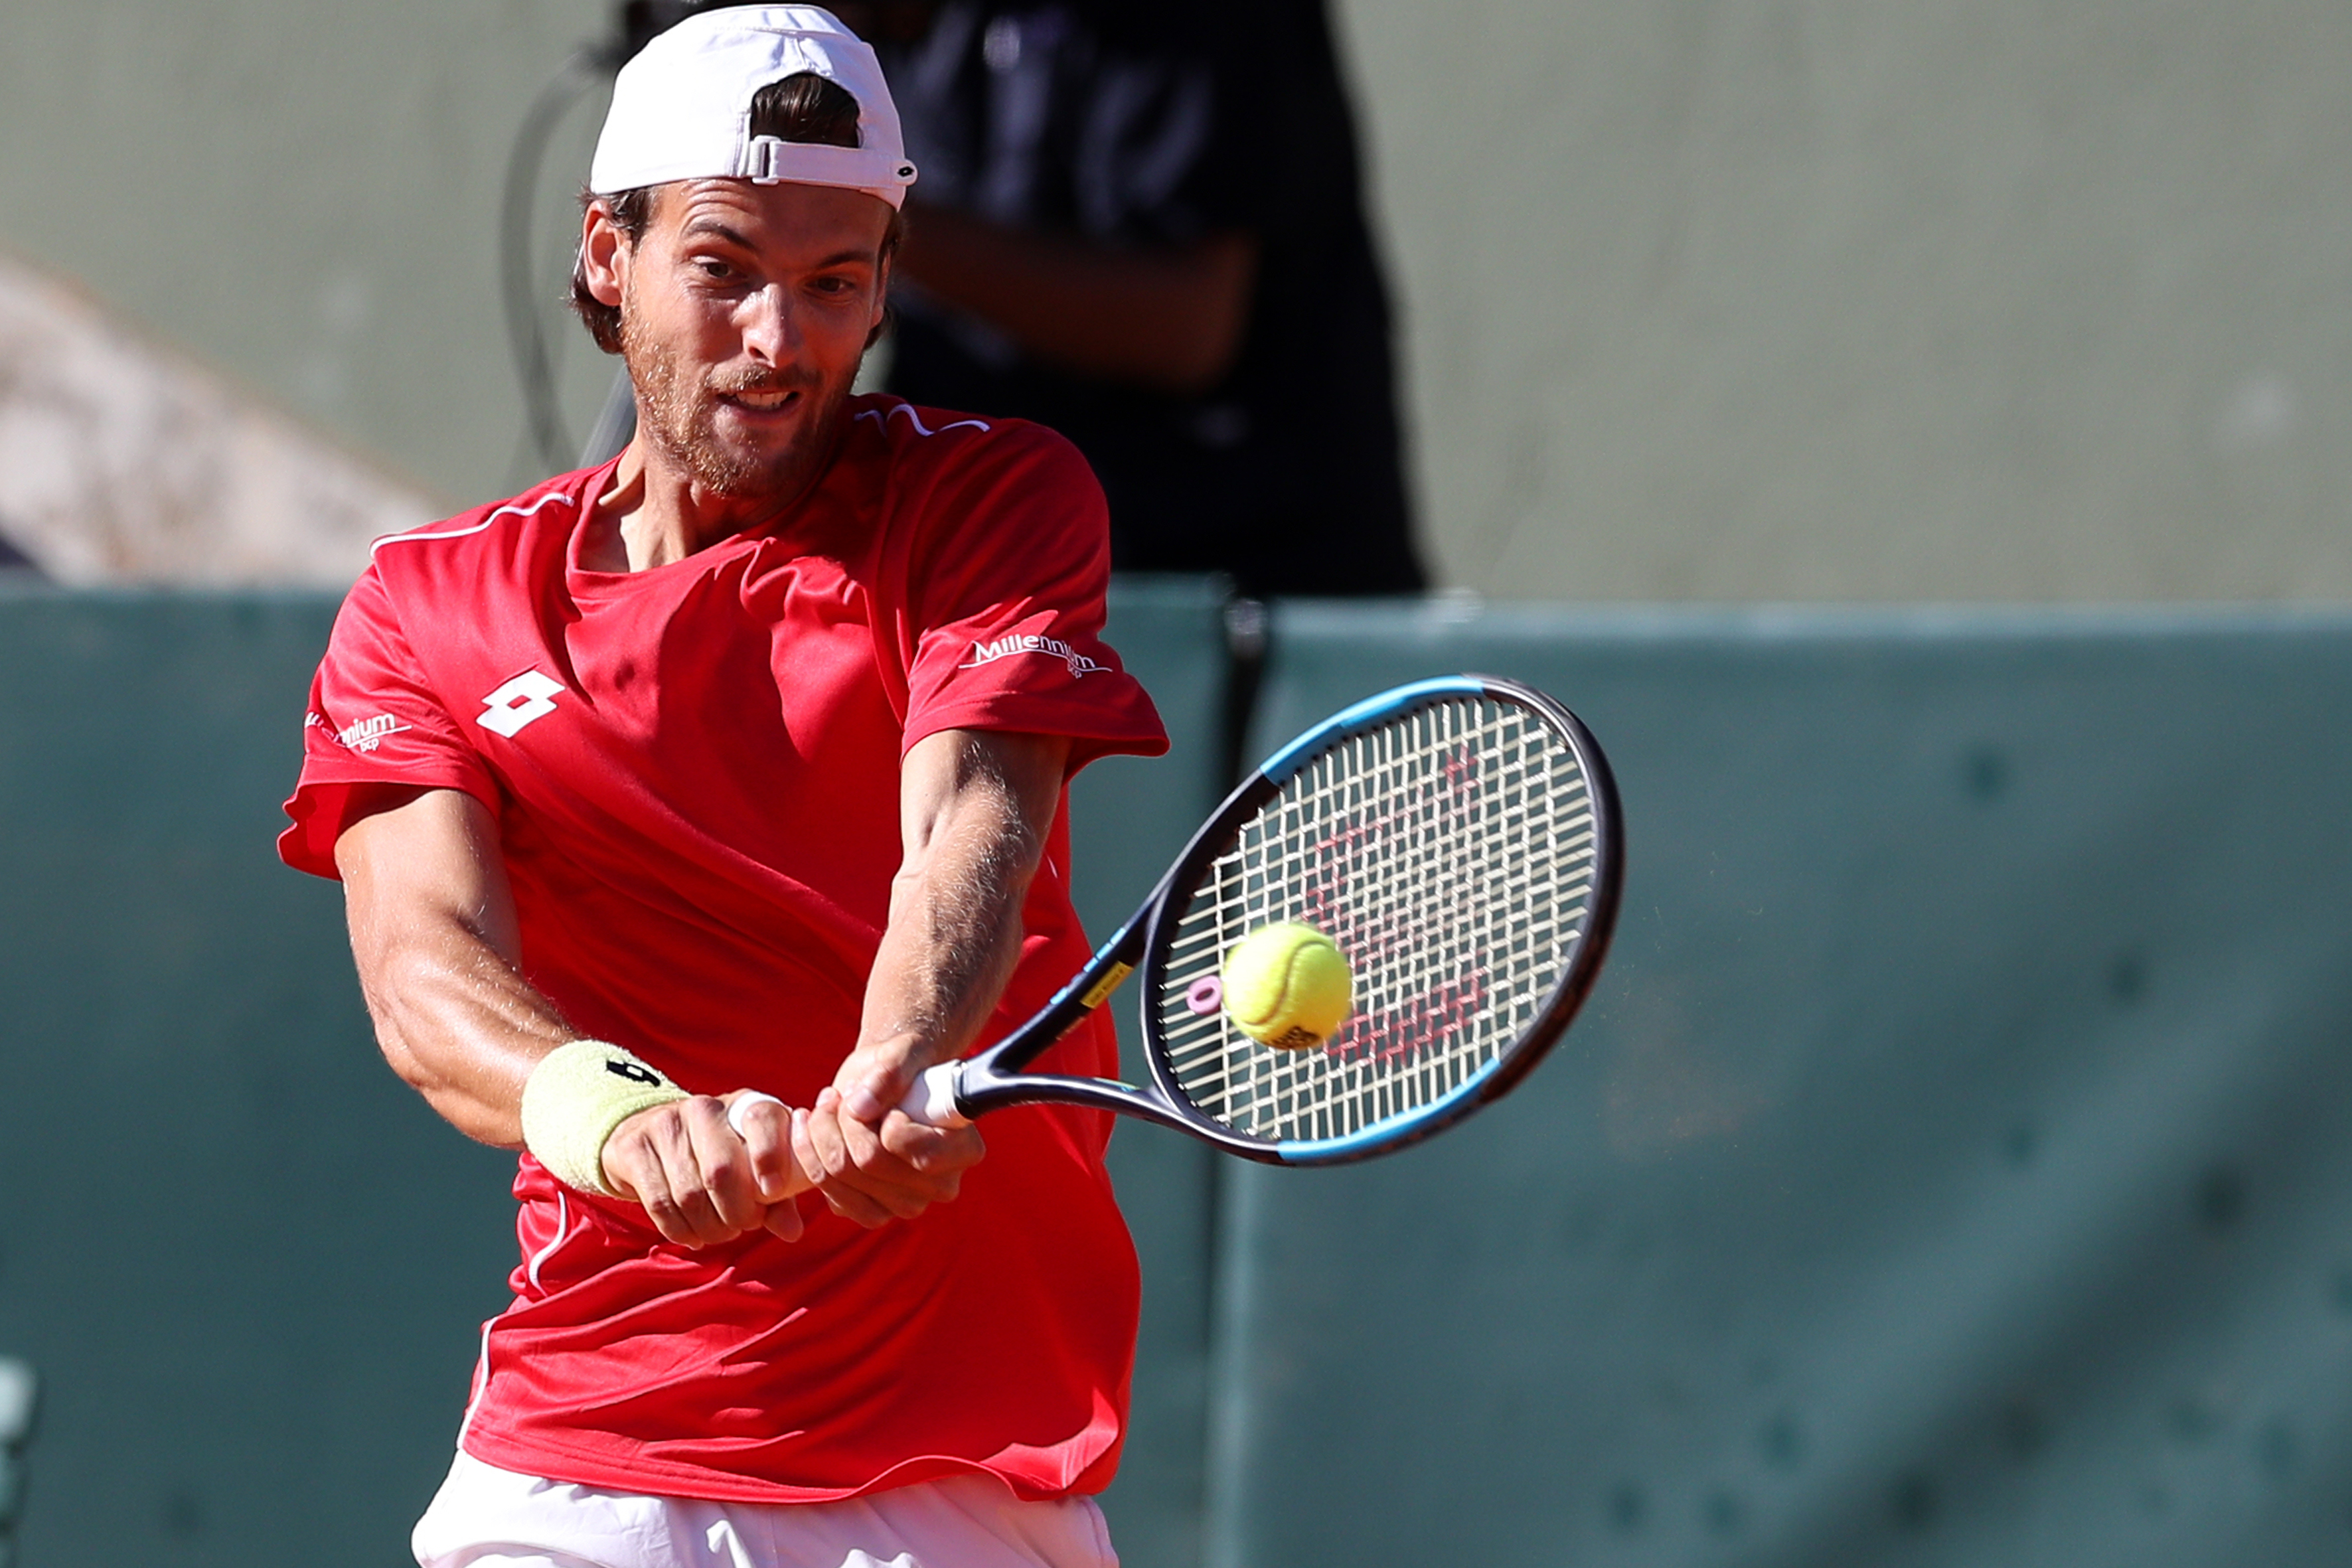 WATCH : Joao Sousa hits six consecutive volleys to win a point against Jo-Wilfried Tsonga